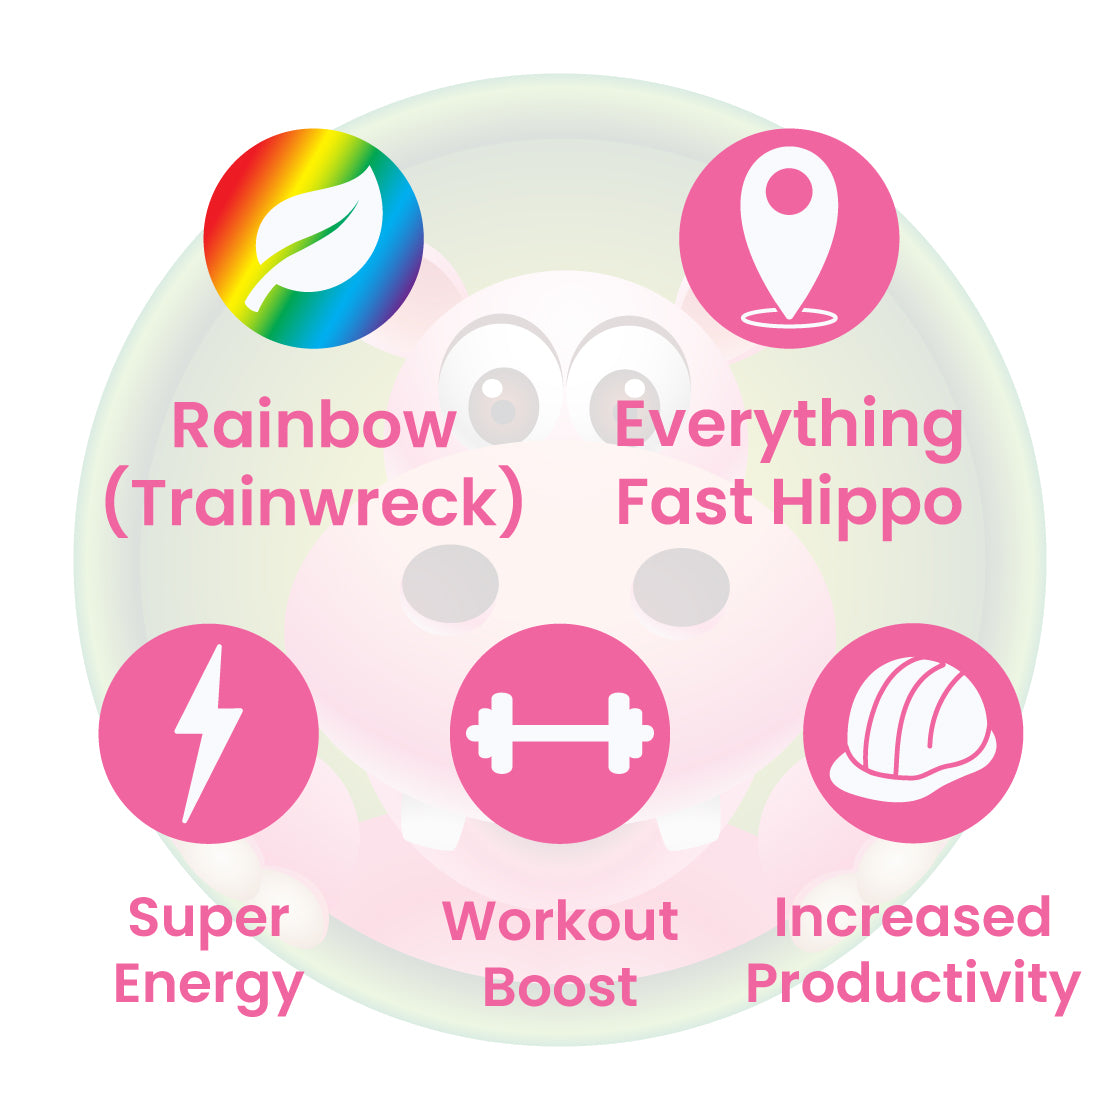 Infographic Details for Happy Hippo Blended Trainwreck Kratom Powder (Fast Rainbow). Leaf color: Rainbow. Kratom Strain Origin: Various. Kratom Effects resonate with Super Energy, Workout Boost, and Increased Productivity.